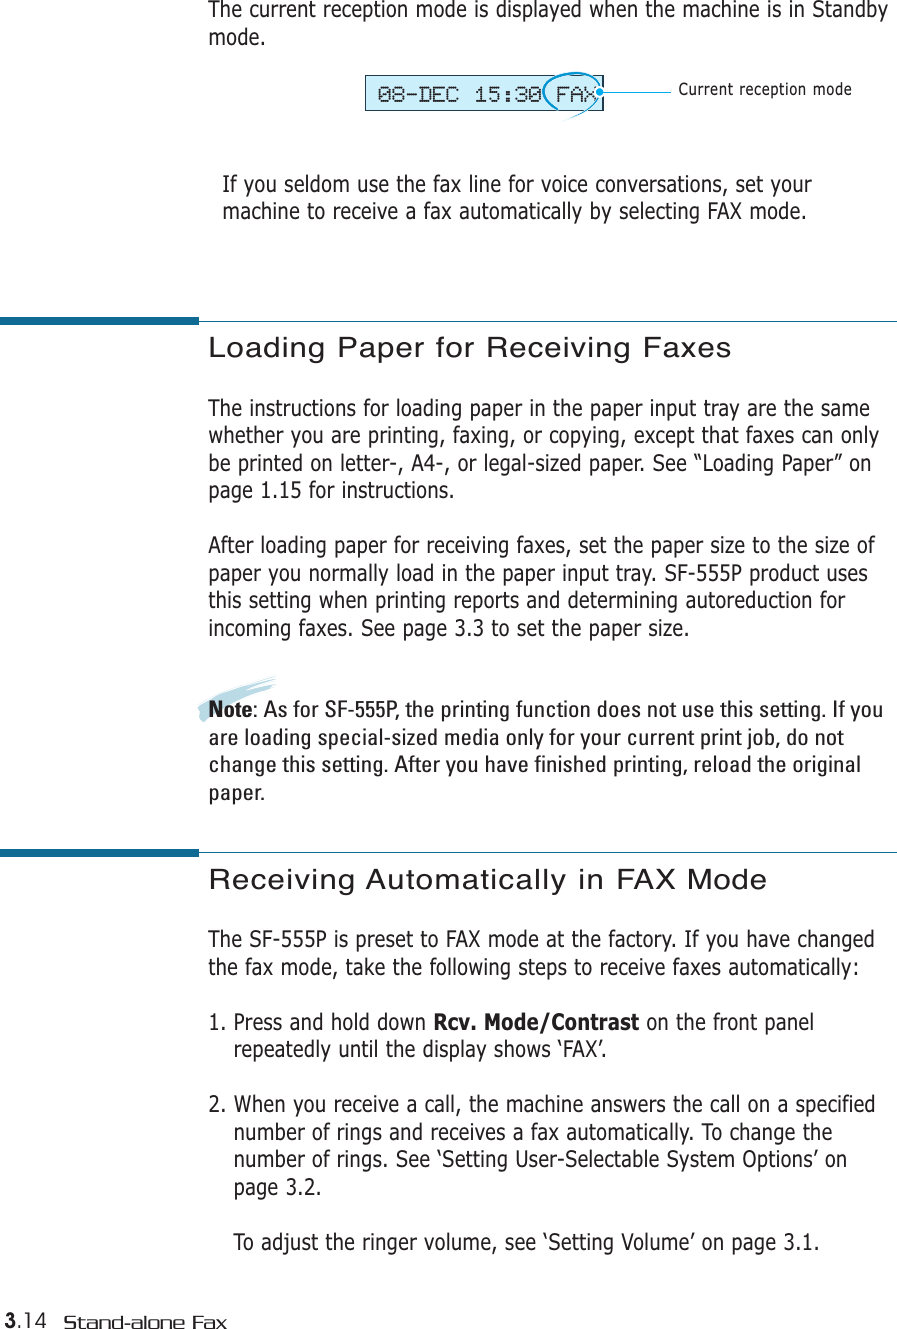 3.14 Stand-alone FaxThe current reception mode is displayed when the machine is in Standbymode. If you seldom use the fax line for voice conversations, set yourmachine to receive a fax automatically by selecting FAX mode. 08-DEC 15:30 FAXCurrent reception modeLoading Paper for Receiving Faxes The instructions for loading paper in the paper input tray are the samewhether you are printing, faxing, or copying, except that faxes can onlybe printed on letter-, A4-, or legal-sized paper. See “Loading Paper” onpage 1.15 for instructions.After loading paper for receiving faxes, set the paper size to the size ofpaper you normally load in the paper input tray. SF-555P product usesthis setting when printing reports and determining autoreduction forincoming faxes. See page 3.3 to set the paper size.Note: As for SF-555P, the printing function does not use this setting. If youare loading special-sized media only for your current print job, do notchange this setting. After you have finished printing, reload the originalpaper.Receiving Automatically in FAX Mode The SF-555P is preset to FAX mode at the factory. If you have changedthe fax mode, take the following steps to receive faxes automatically:1. Press and hold down Rcv. Mode/Contrast on the front panelrepeatedly until the display shows ‘FAX’.2. When you receive a call, the machine answers the call on a specifiednumber of rings and receives a fax automatically. To change thenumber of rings. See ‘Setting User-Selectable System Options’ onpage 3.2.To adjust the ringer volume, see ‘Setting Volume’ on page 3.1.